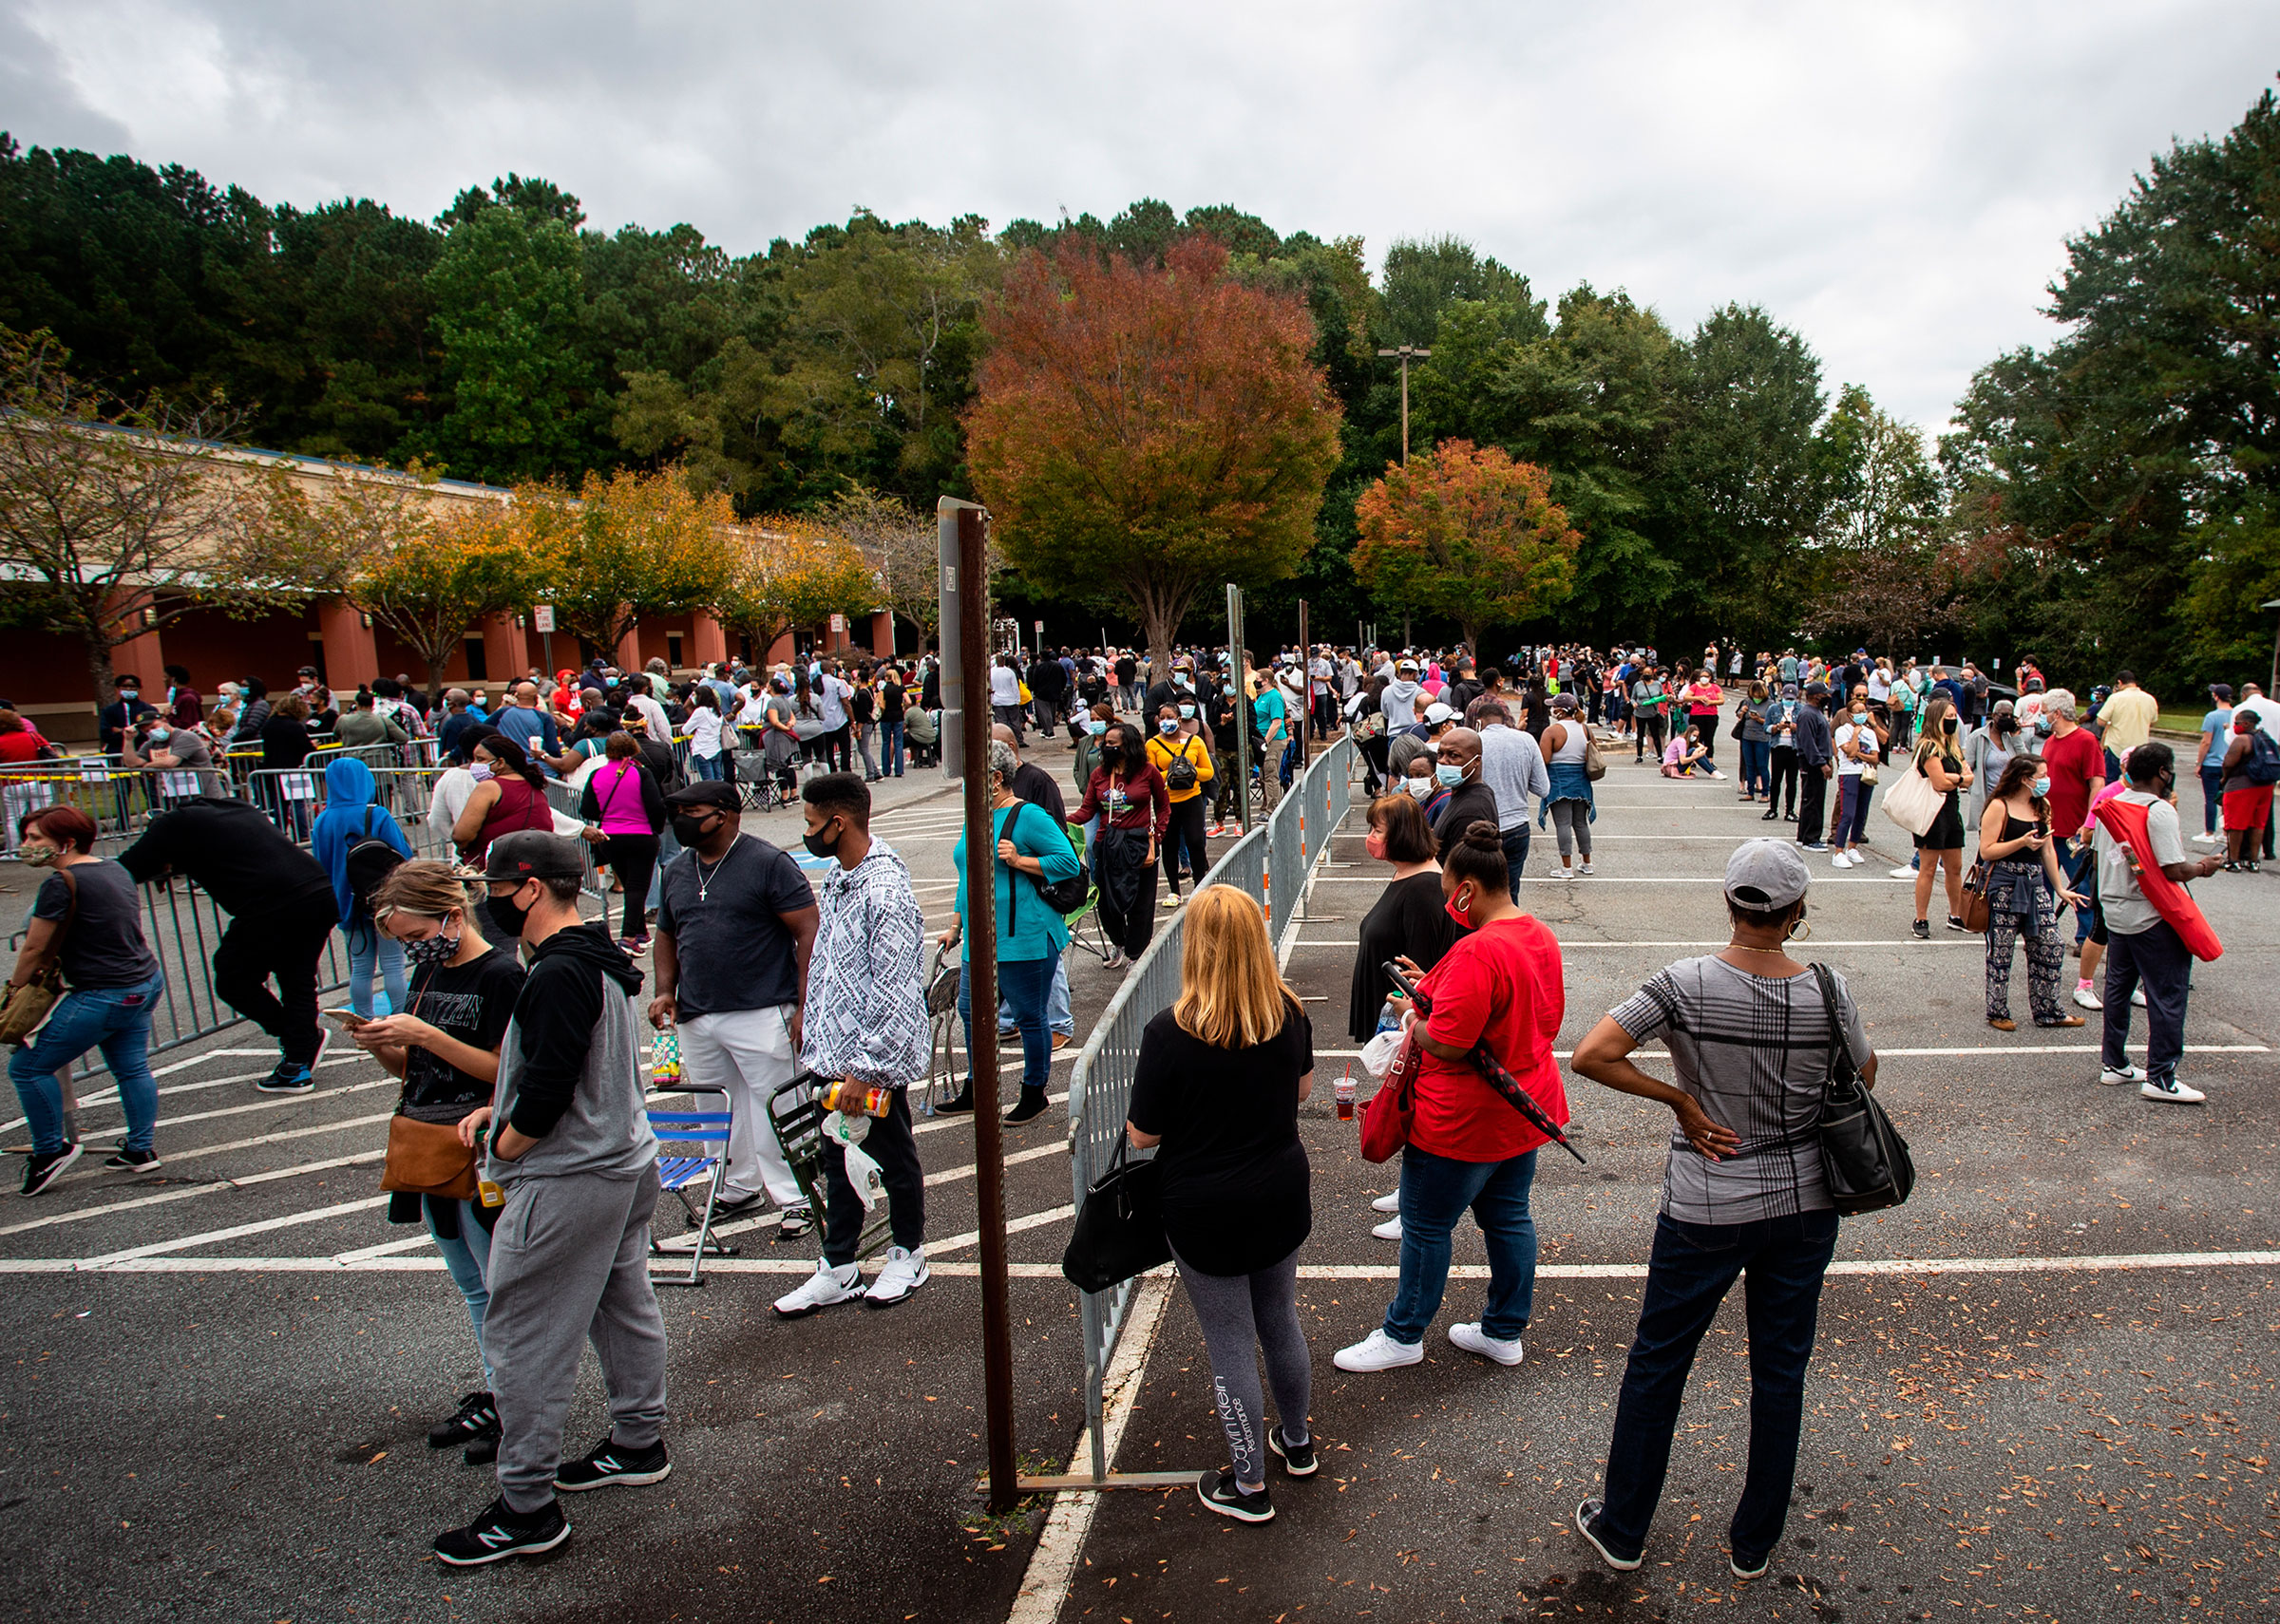 Hundreds of people wait in line to vote early in the general election in Marietta, Georgia, on October 12. Marietta is located in Cobb County.